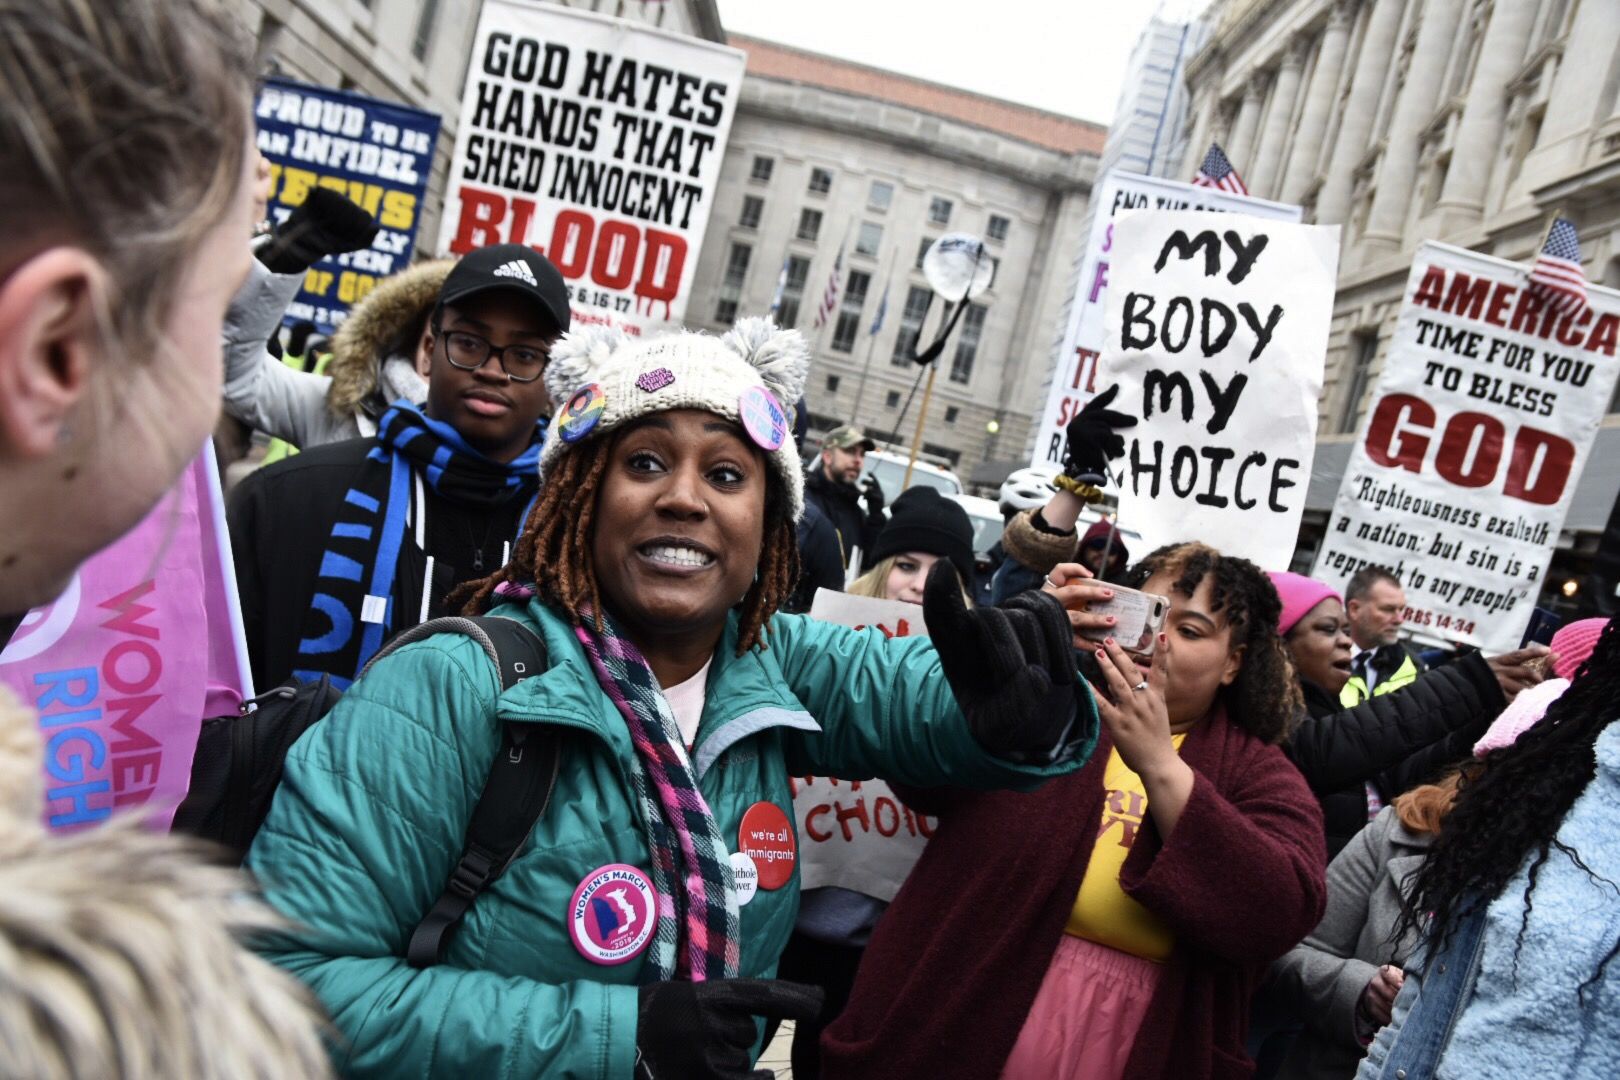 A group of marchers confront a small number of anti-abortion activists attempting to drown out the main rally with a megaphone. (WTOP/Alejandro Alvarez)